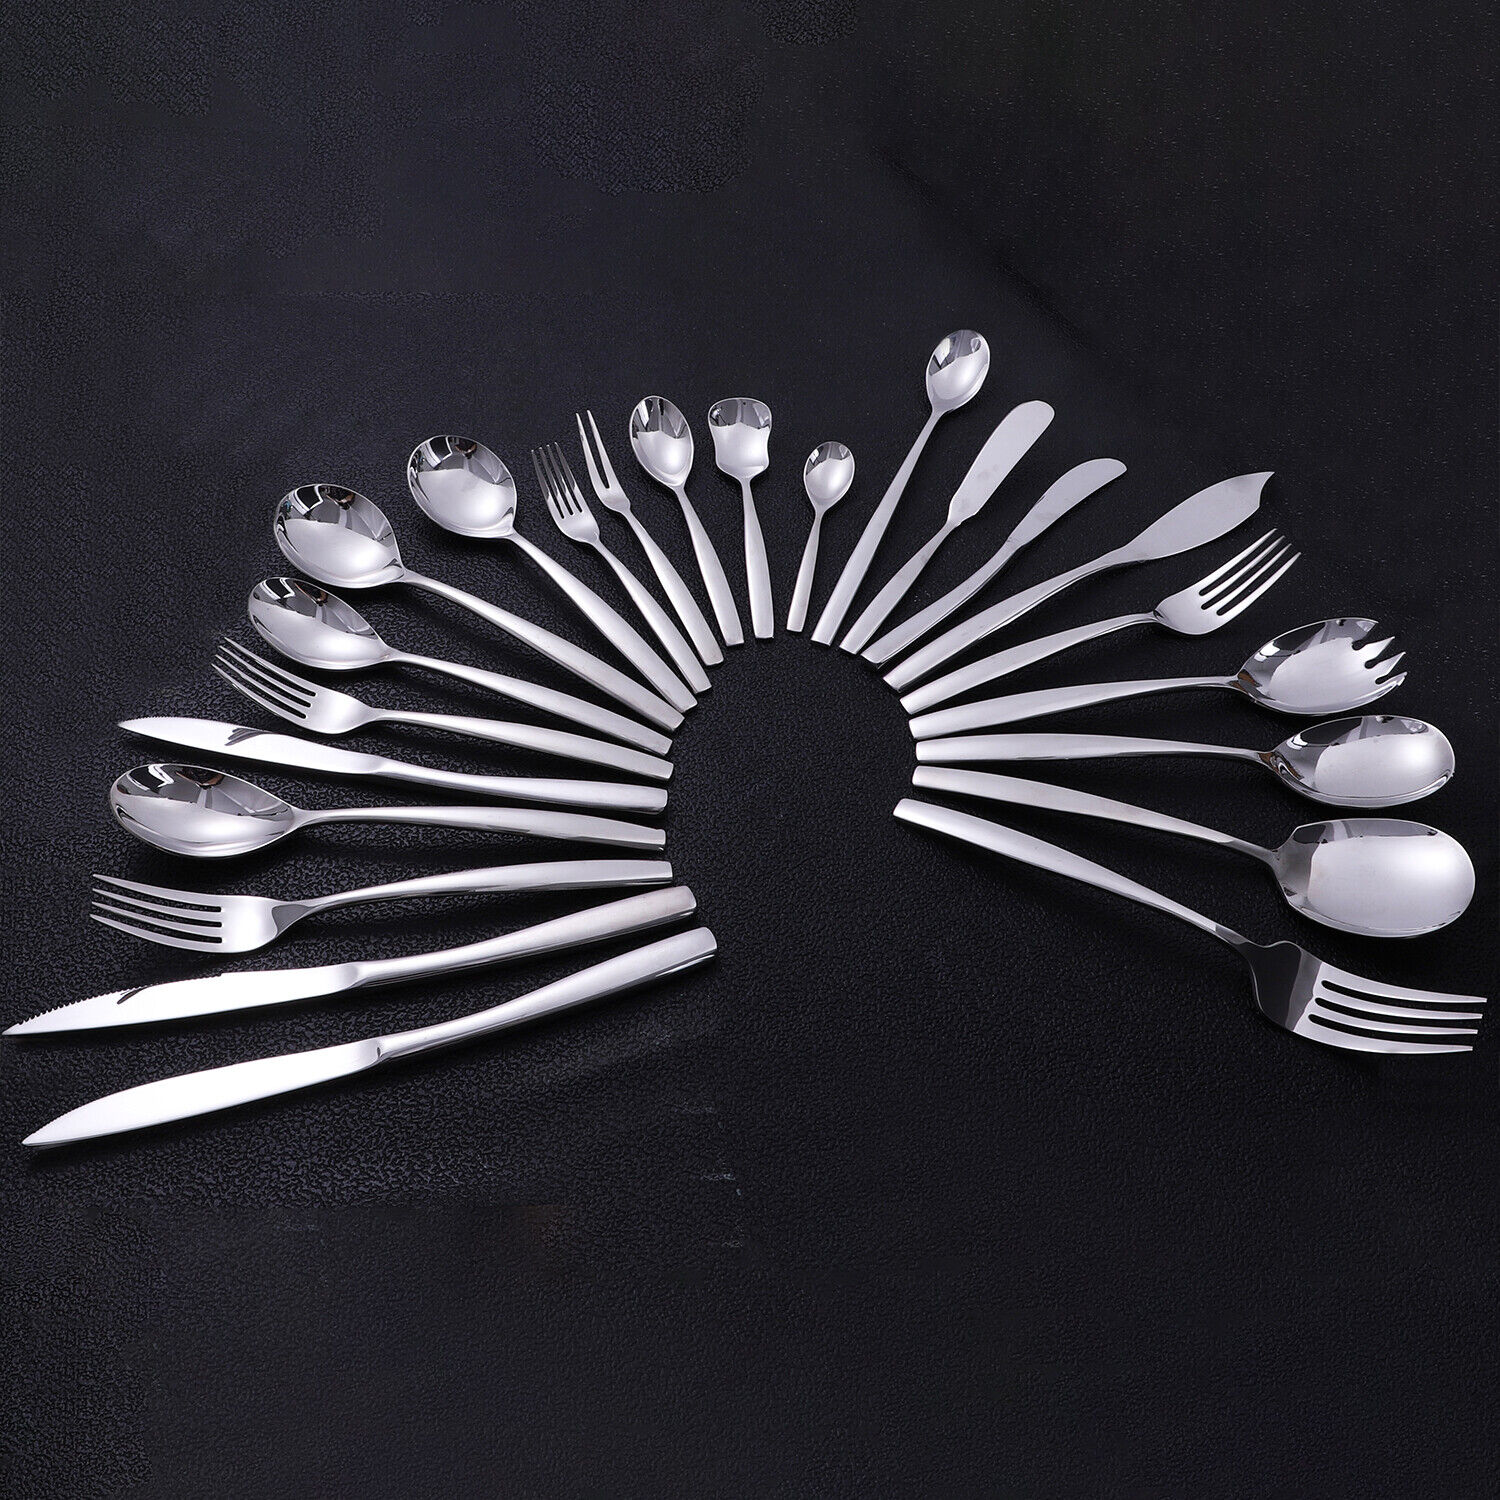 23 Pc Premium Solid Polished Cutlery Set- 304 Stainless Steel 3 colors available